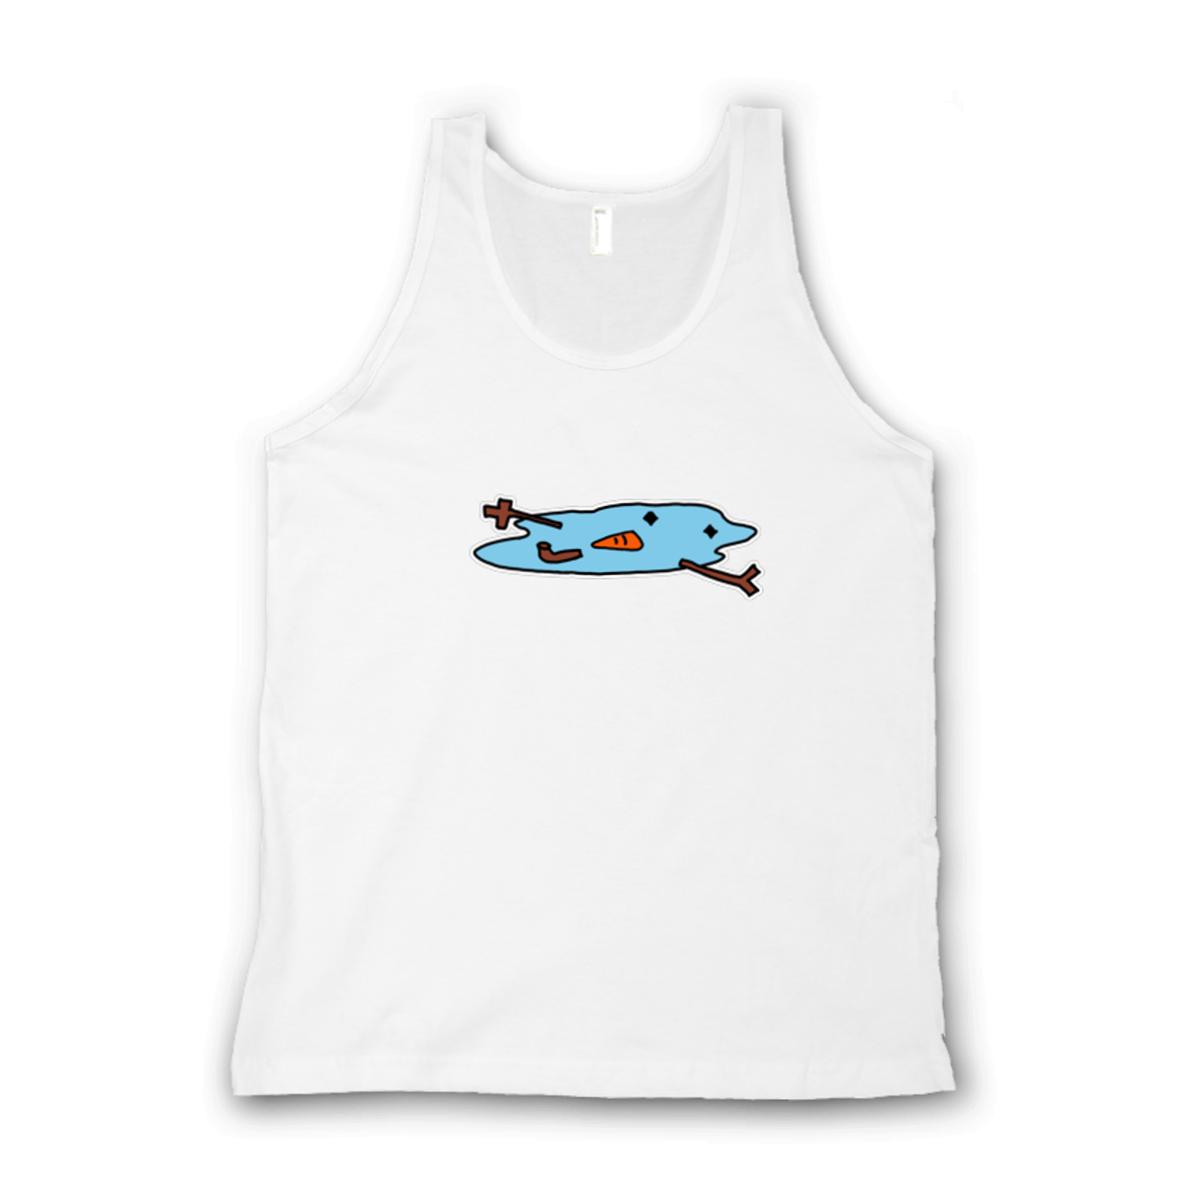 Snowman Puddle Unisex Tank Top Extra Small white